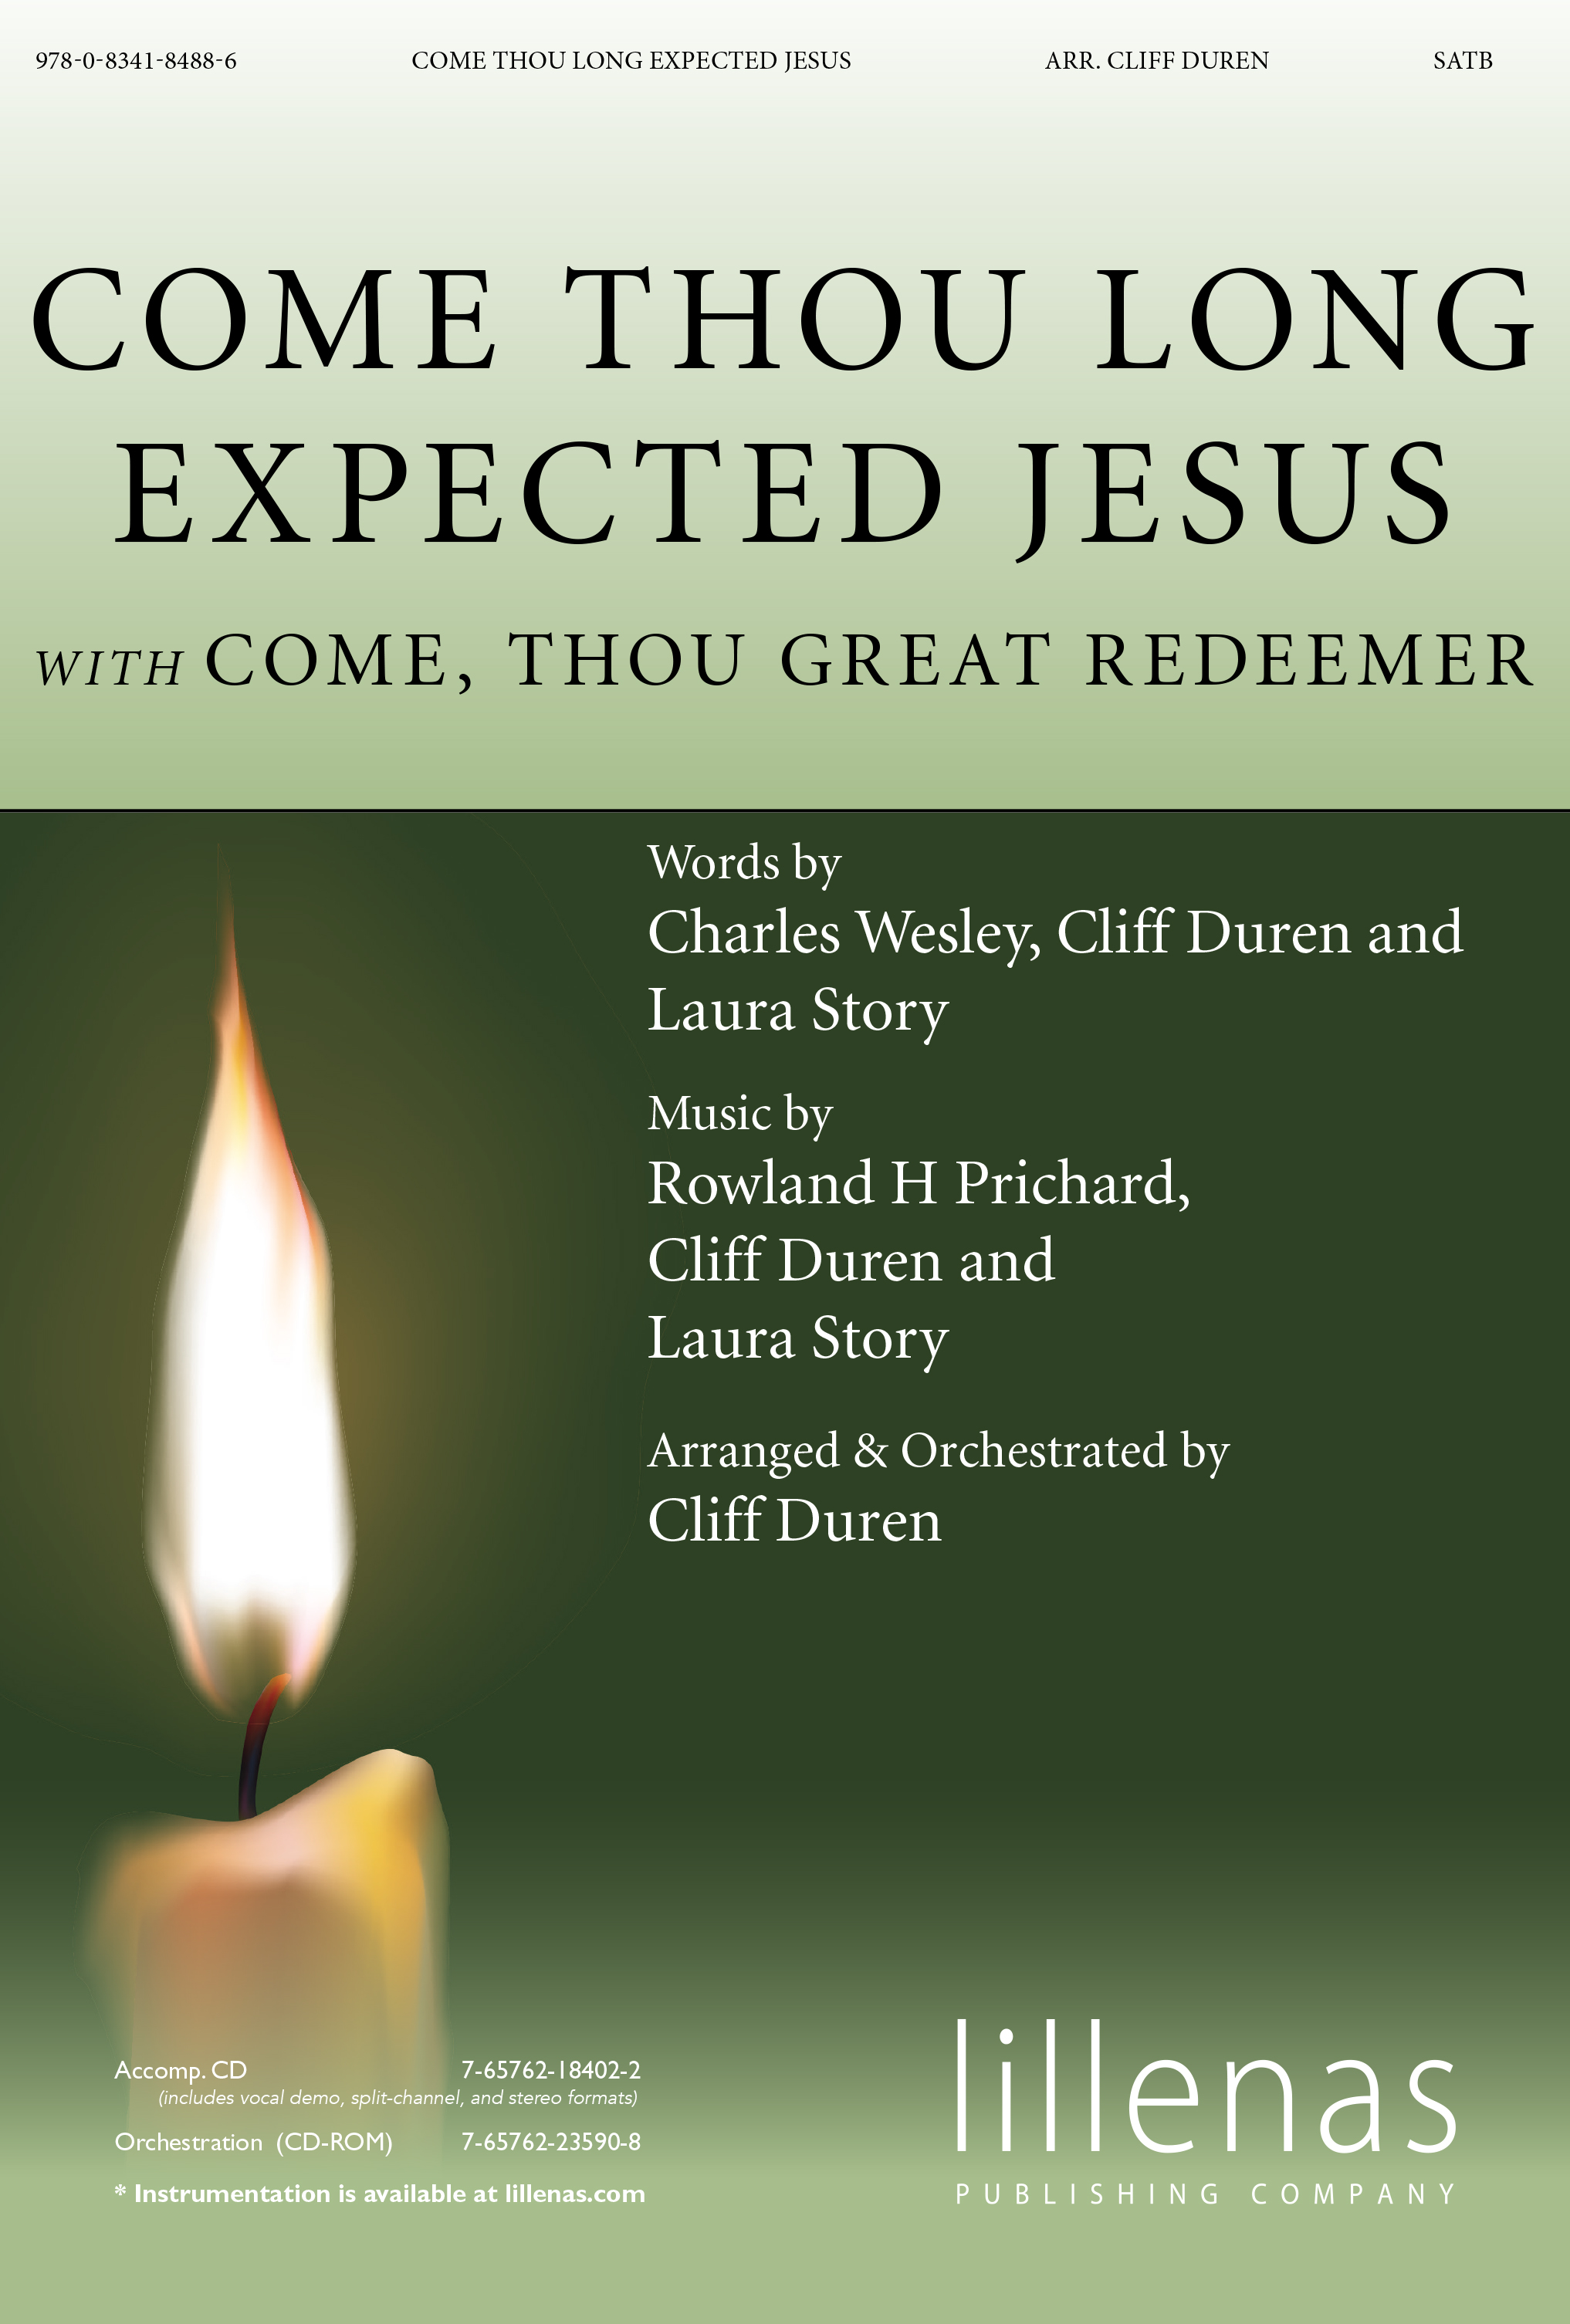 Come Thou Long Expected Jesus w/Come thou Great Redeemer